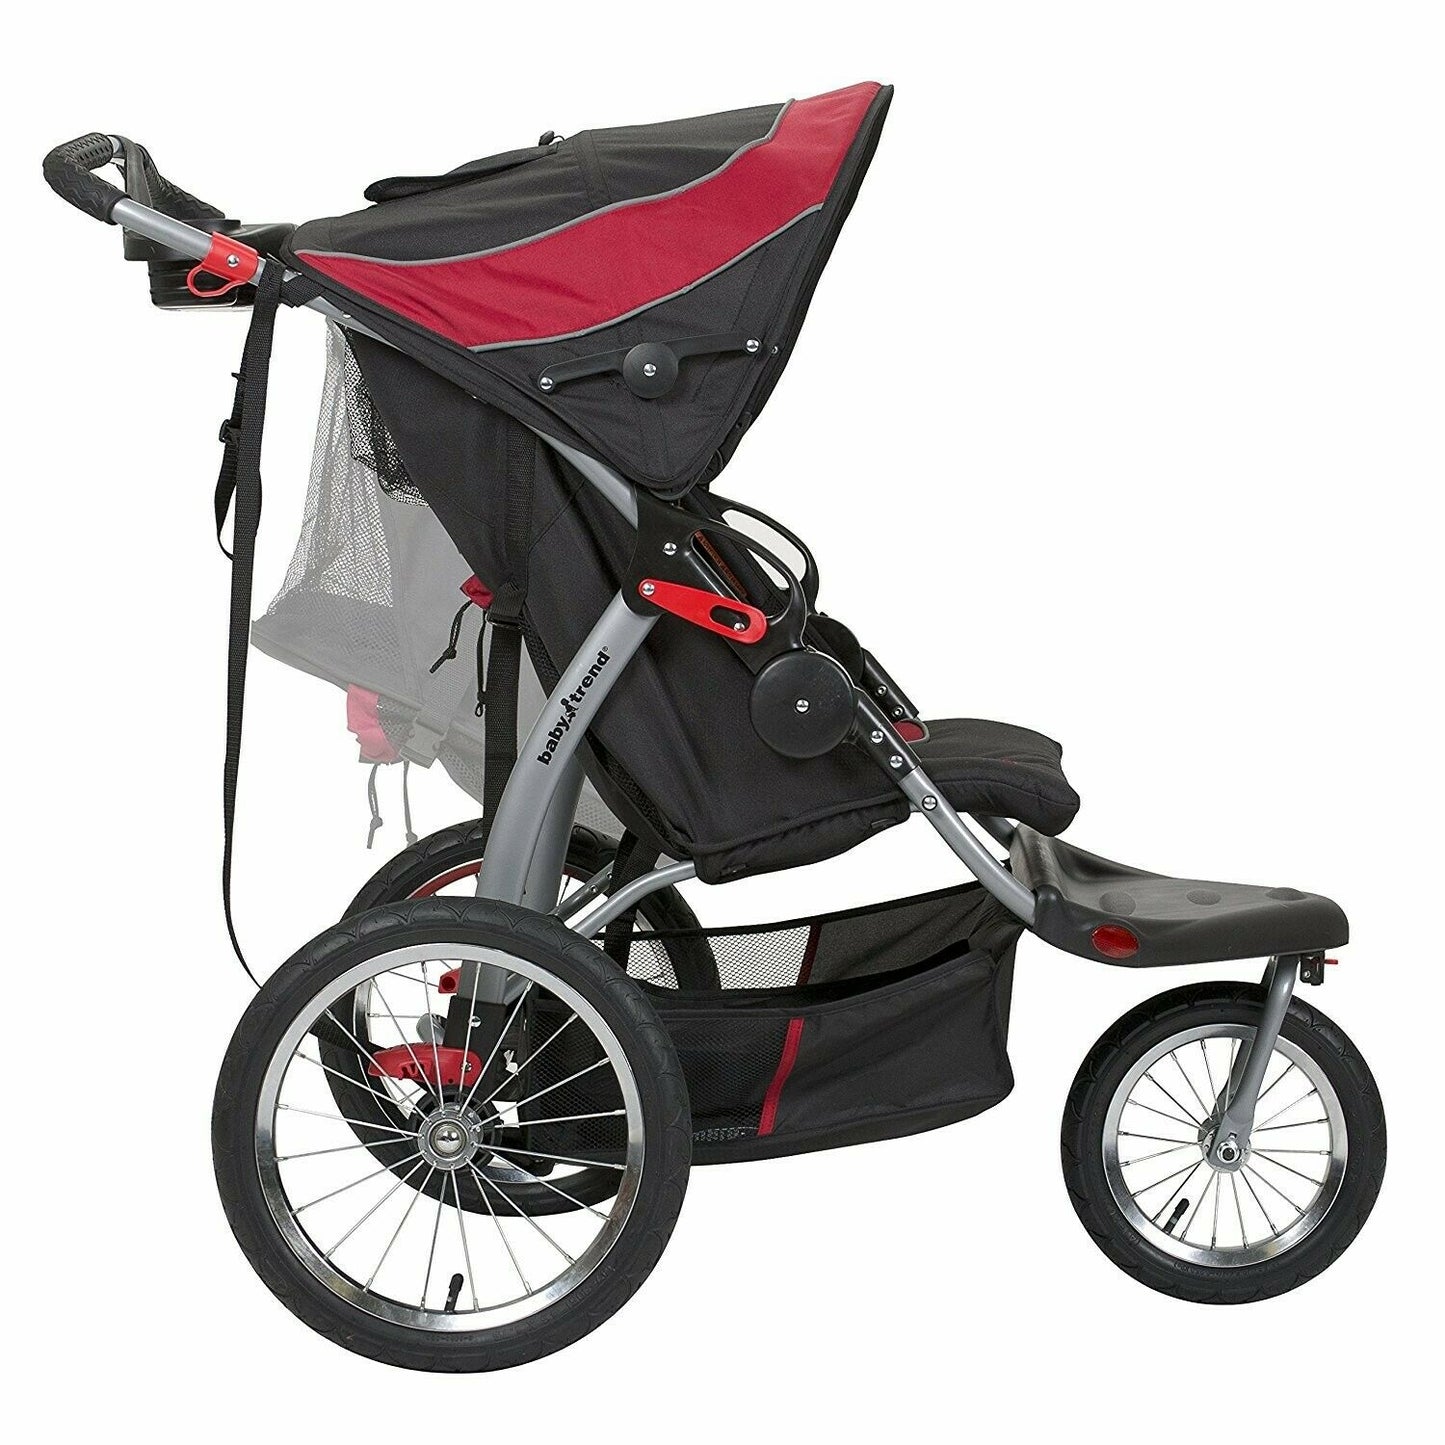 Baby Double Jogger Stroller Twins Infant Toddler Kids New Boxed - Red